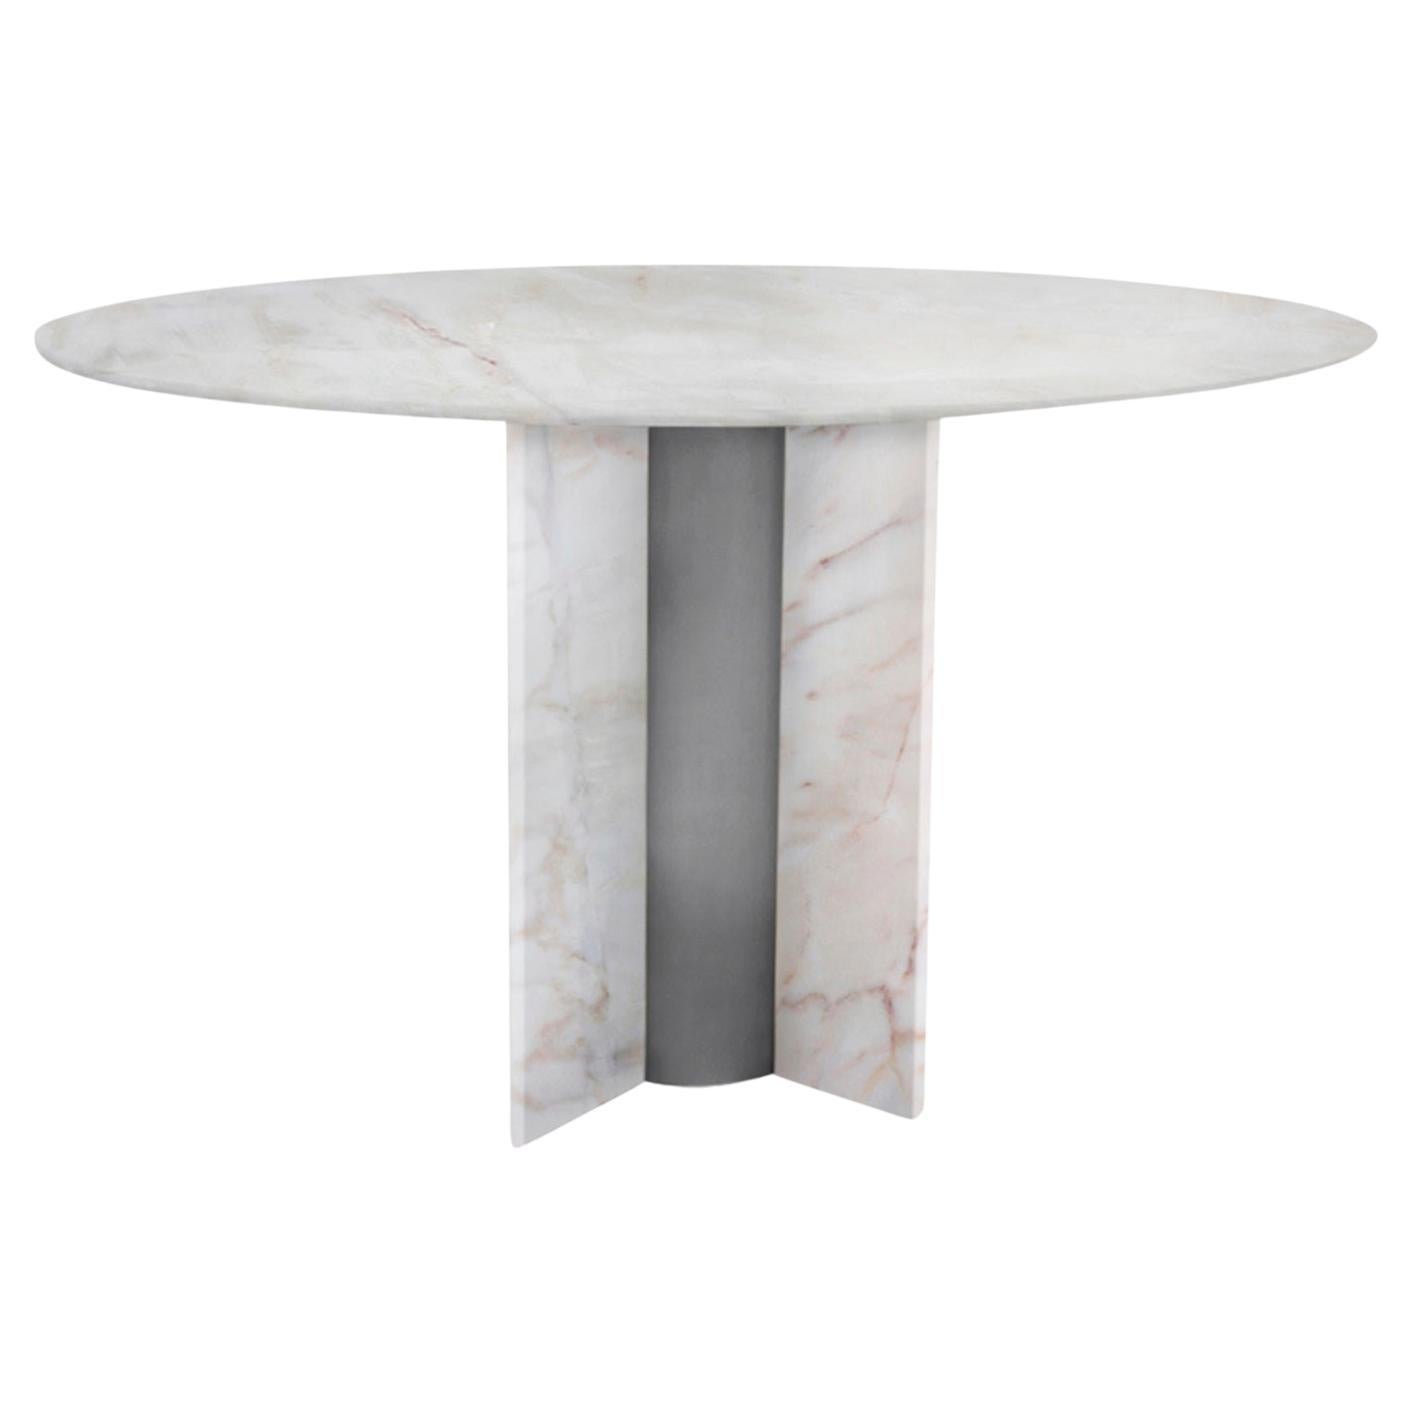 Round Marble Dining Table "Small White Coloss"